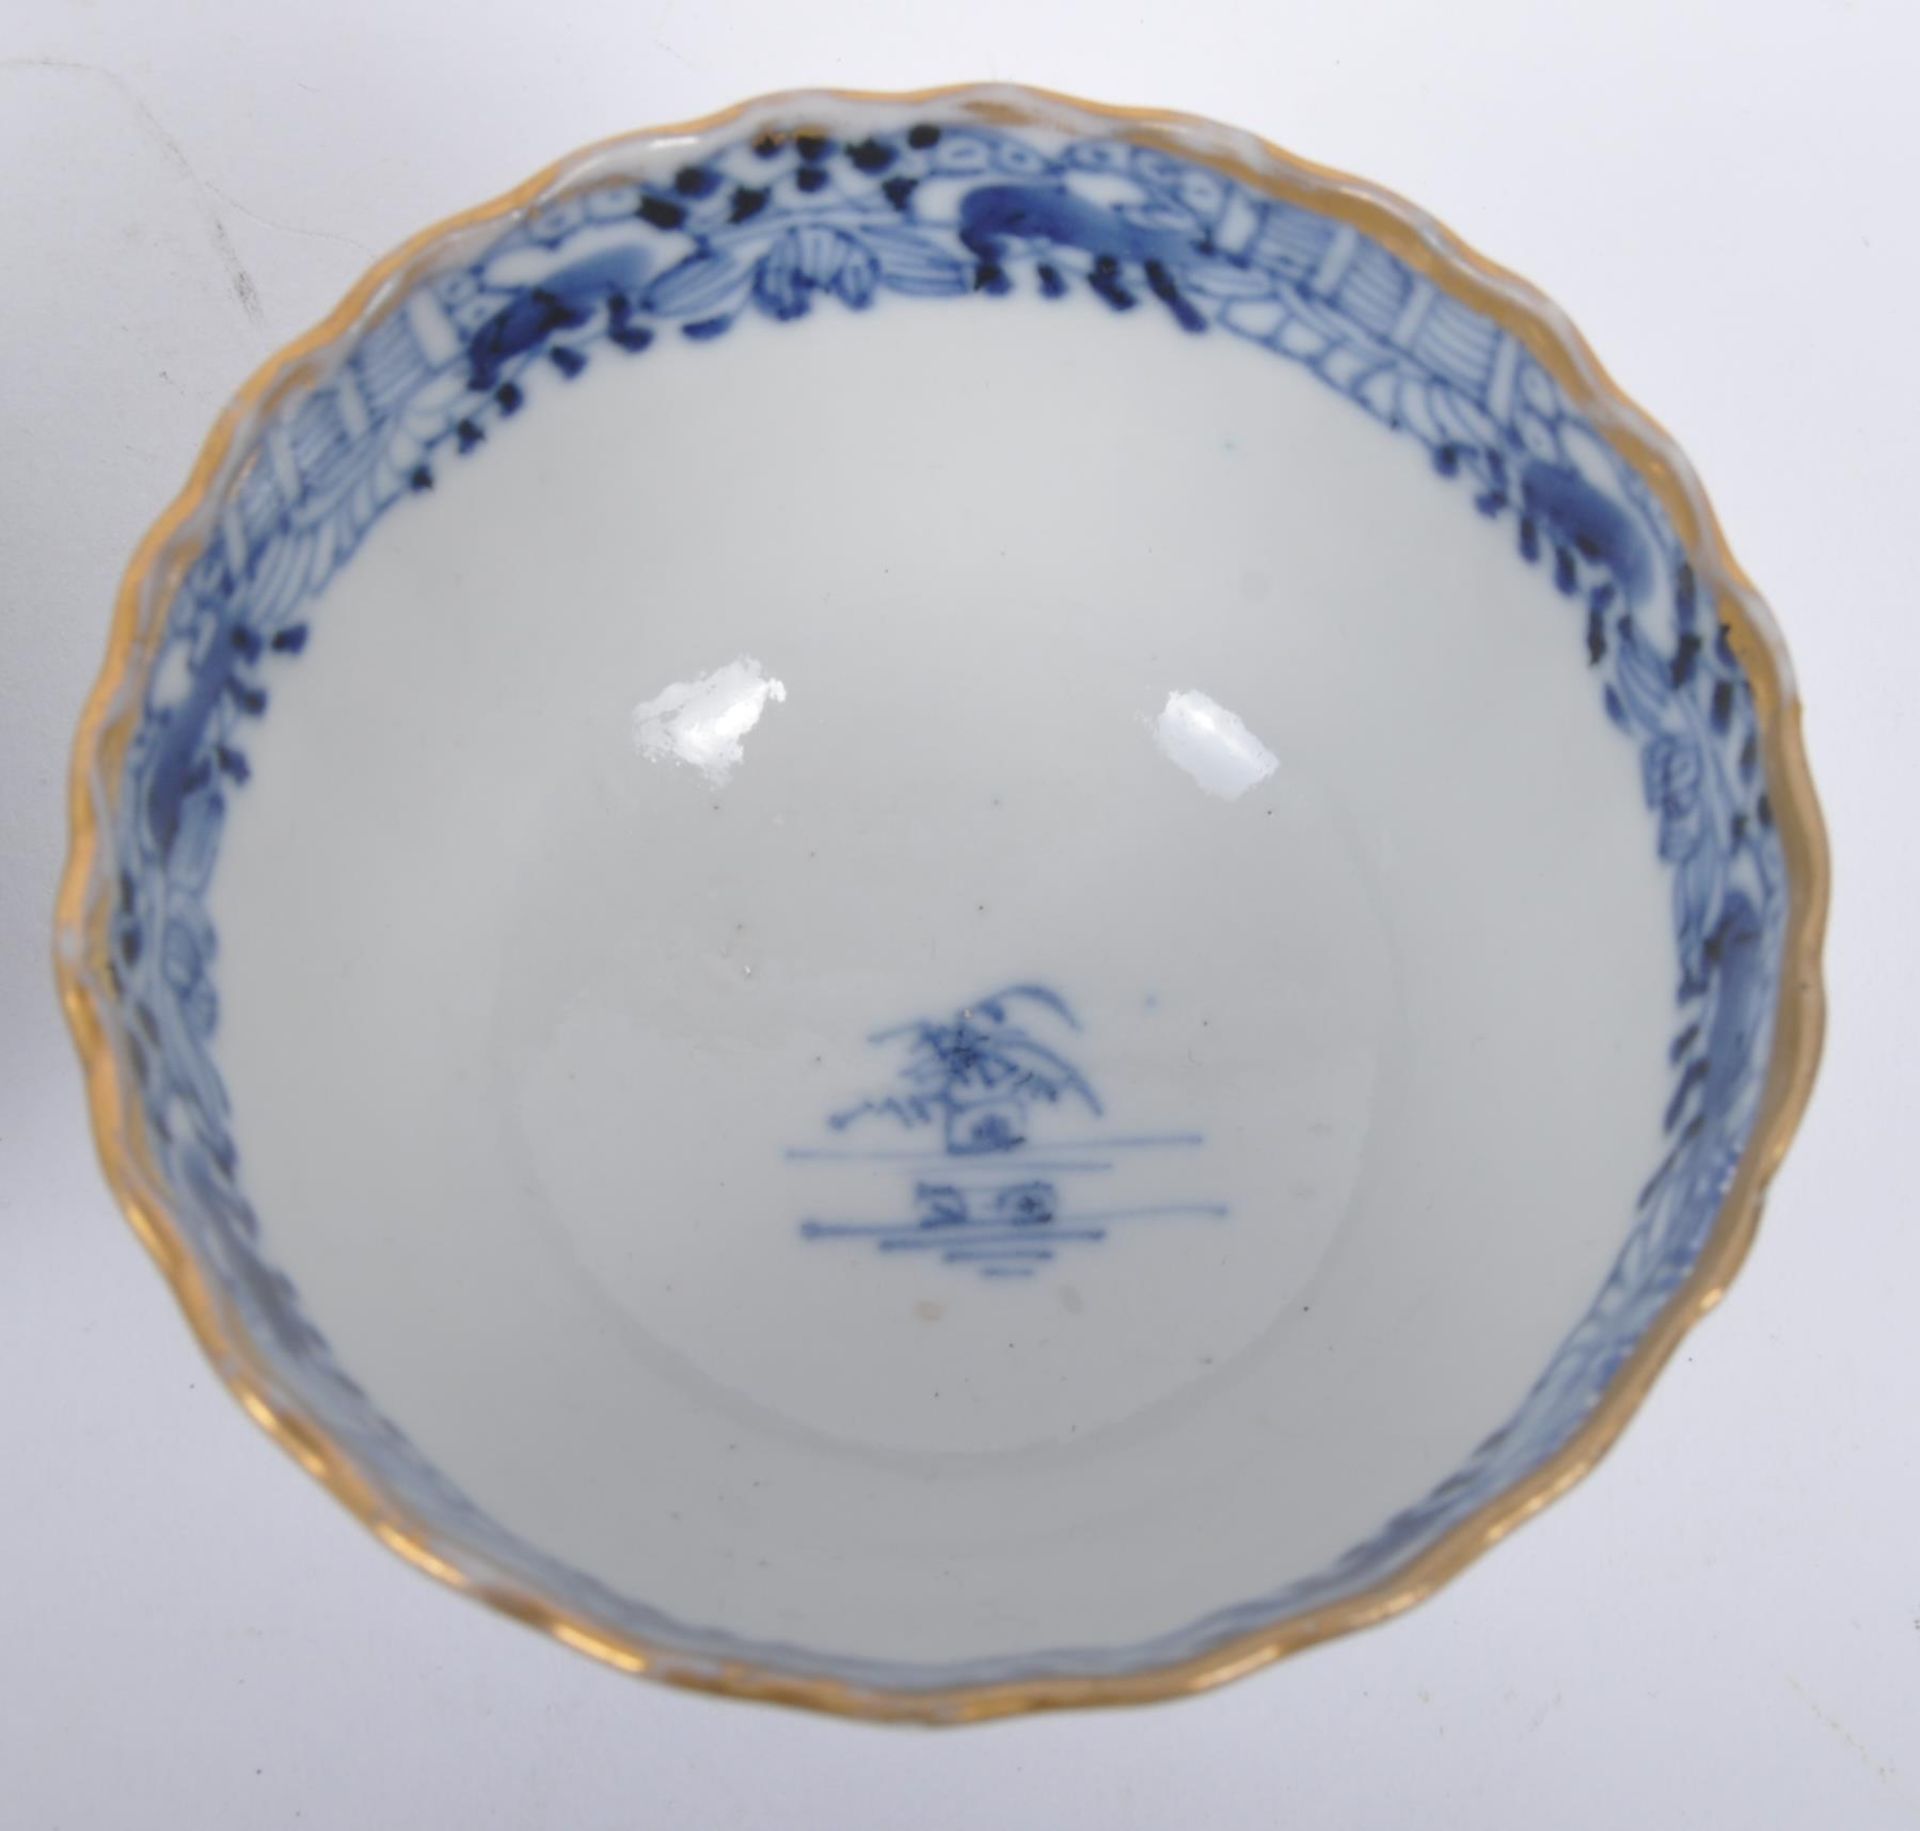 THREE 19TH CENTURY CHINESE BLUE & WHITE PORCELAIN BOWLS - Image 3 of 7